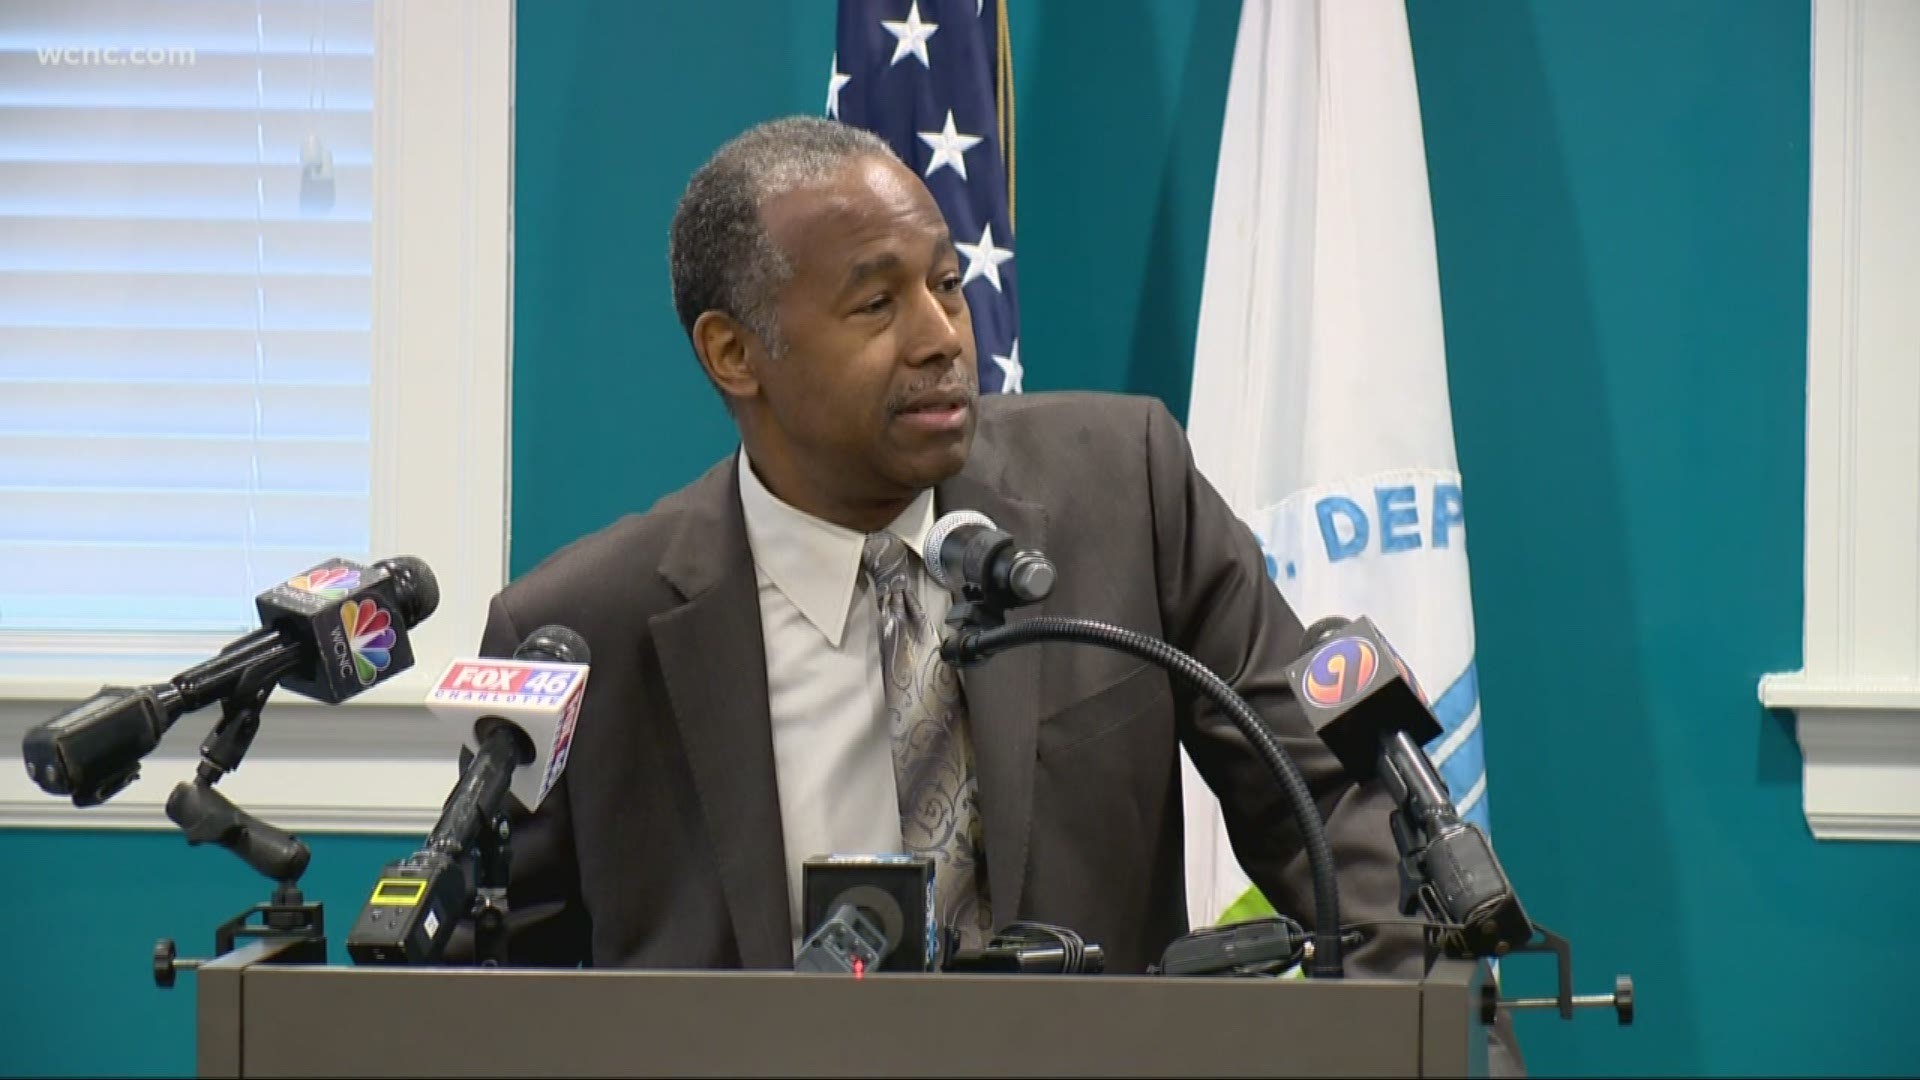 Ben Carson spoke about affordable housing -- a problem seen across the country, and definitely in the Queen City.